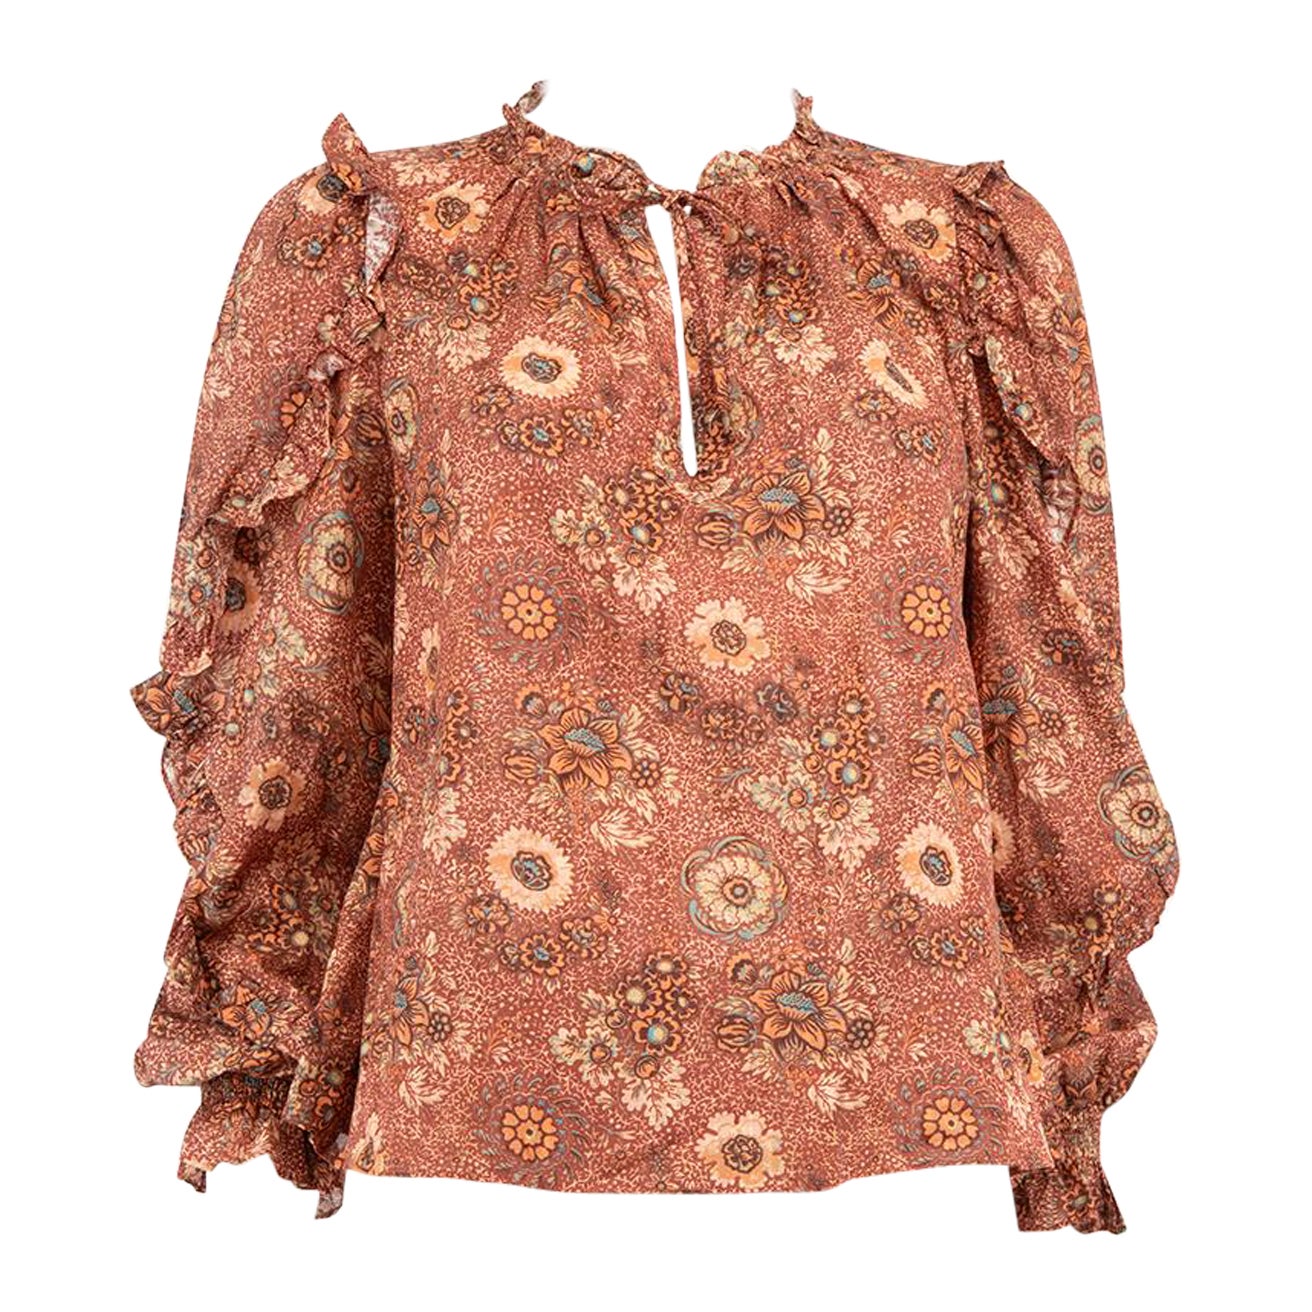 Ulla Johnson Brown Floral Ruffle Accent Top Size S